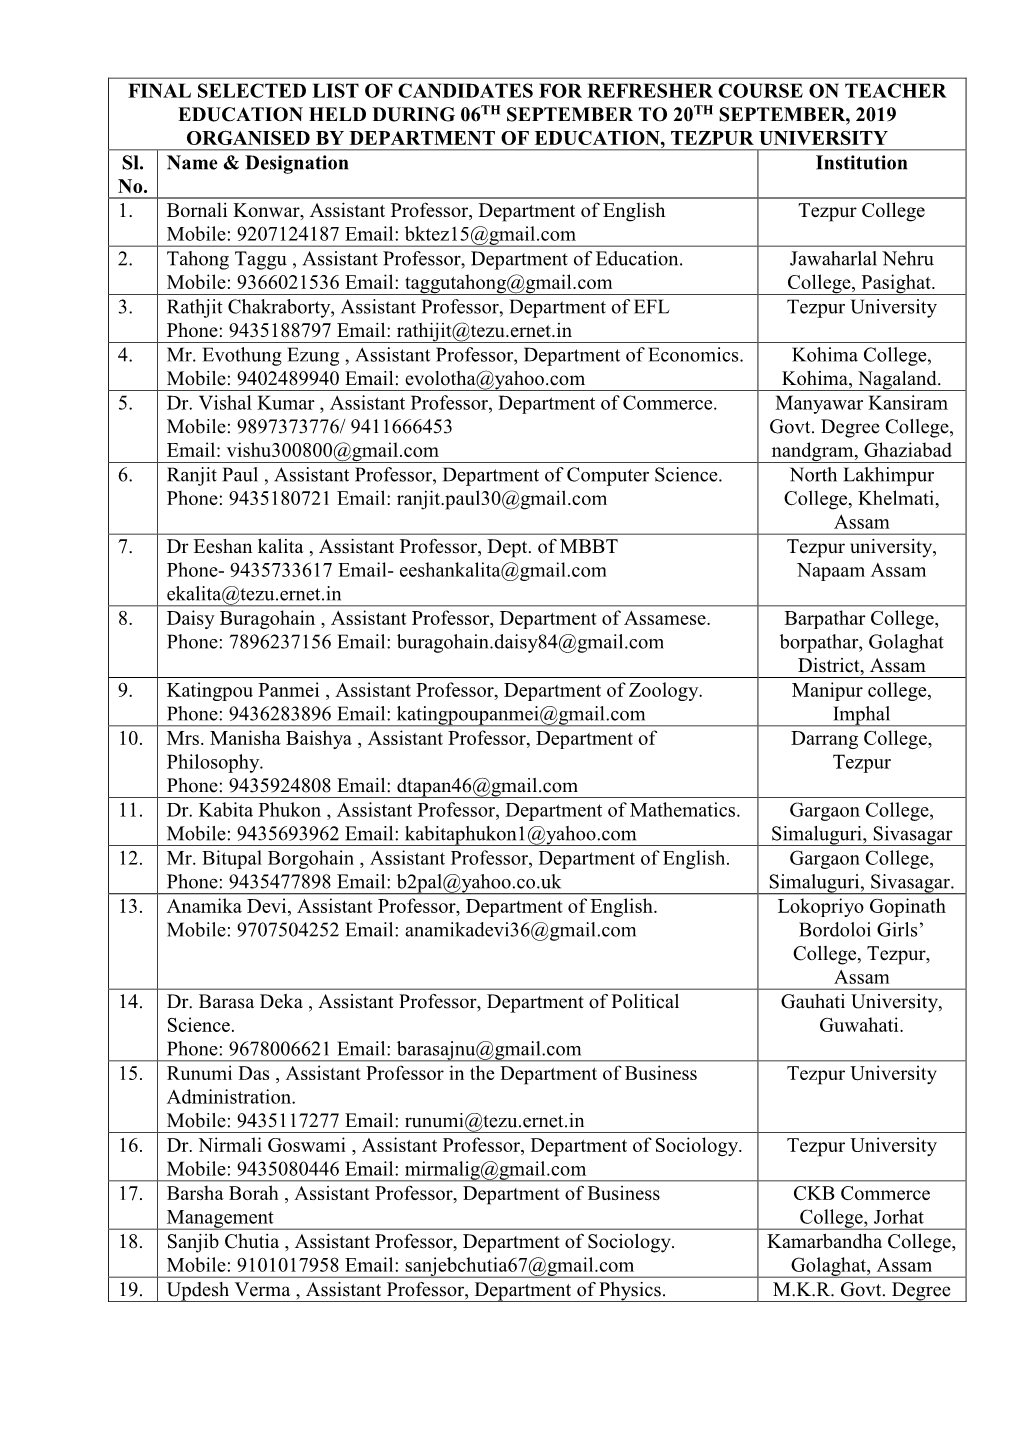 Final Selected List of Candidates for Refresher